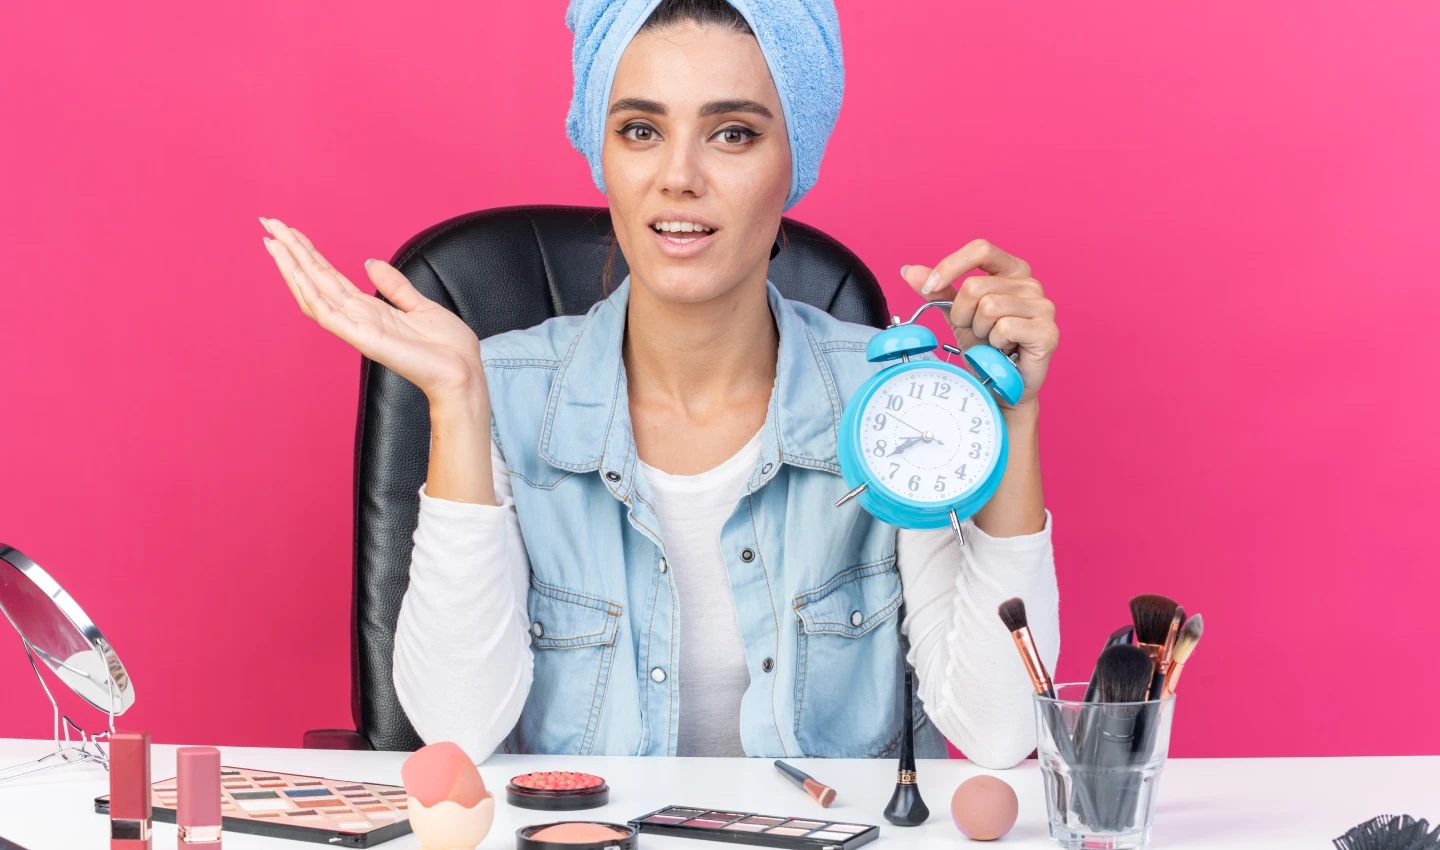 A young woman in sky blue jeans and coat is holding a clock in her hand while looking at the camera, highlighting the importance of making your foundation last all day with these long-lasting hacks.